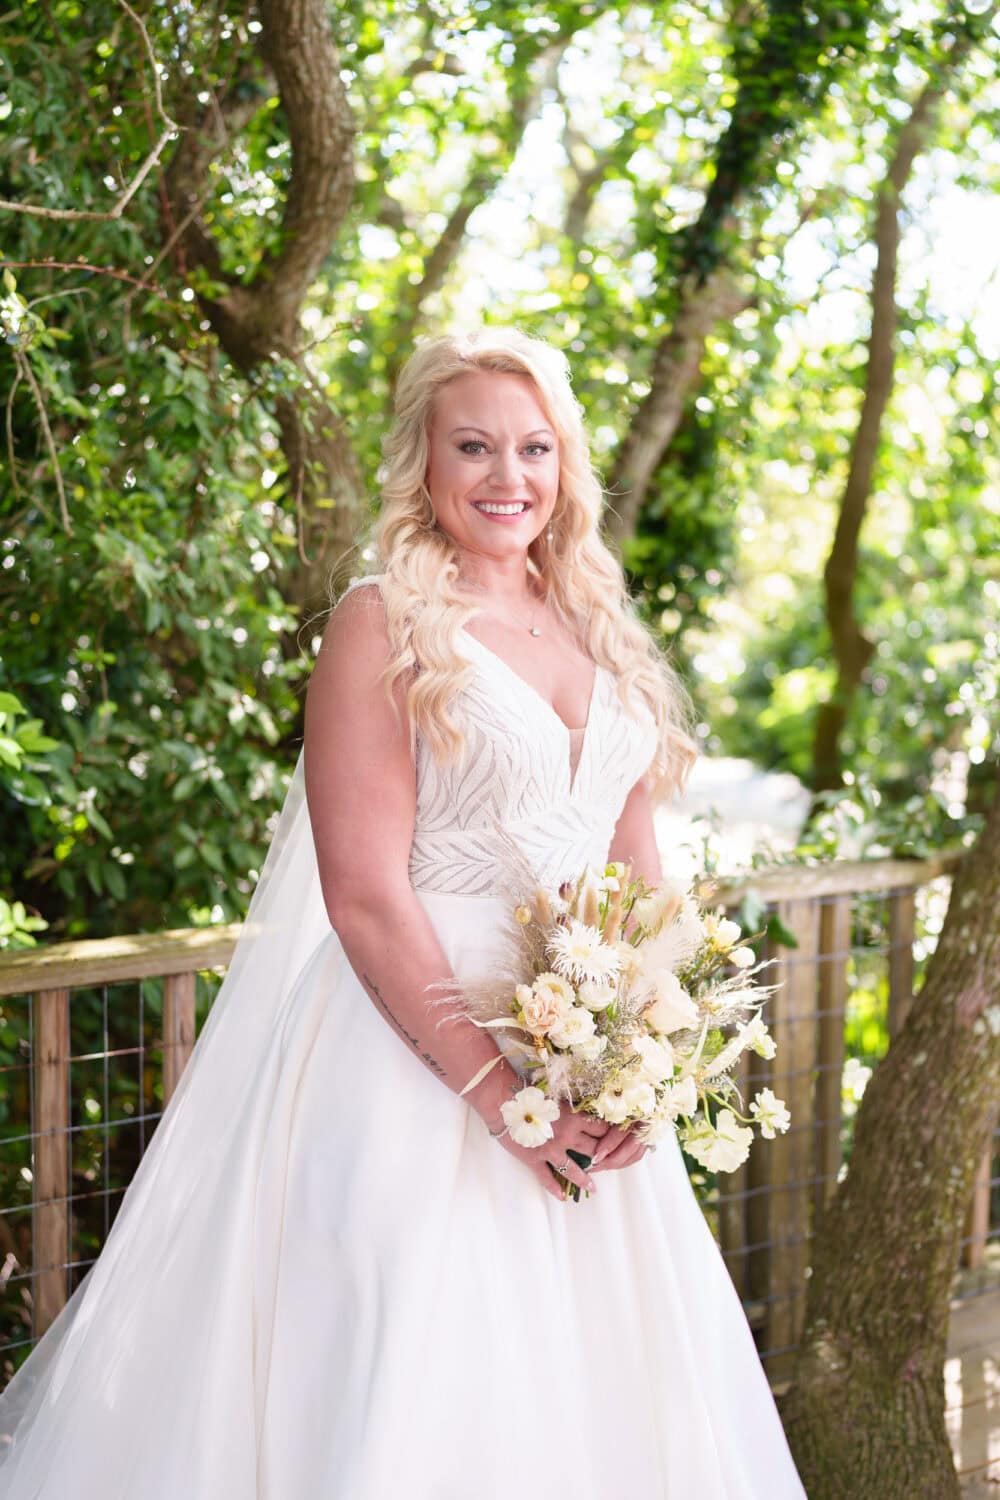 Portraits of the bride by the foliage around the beach house - Beach House in Pawleys Island